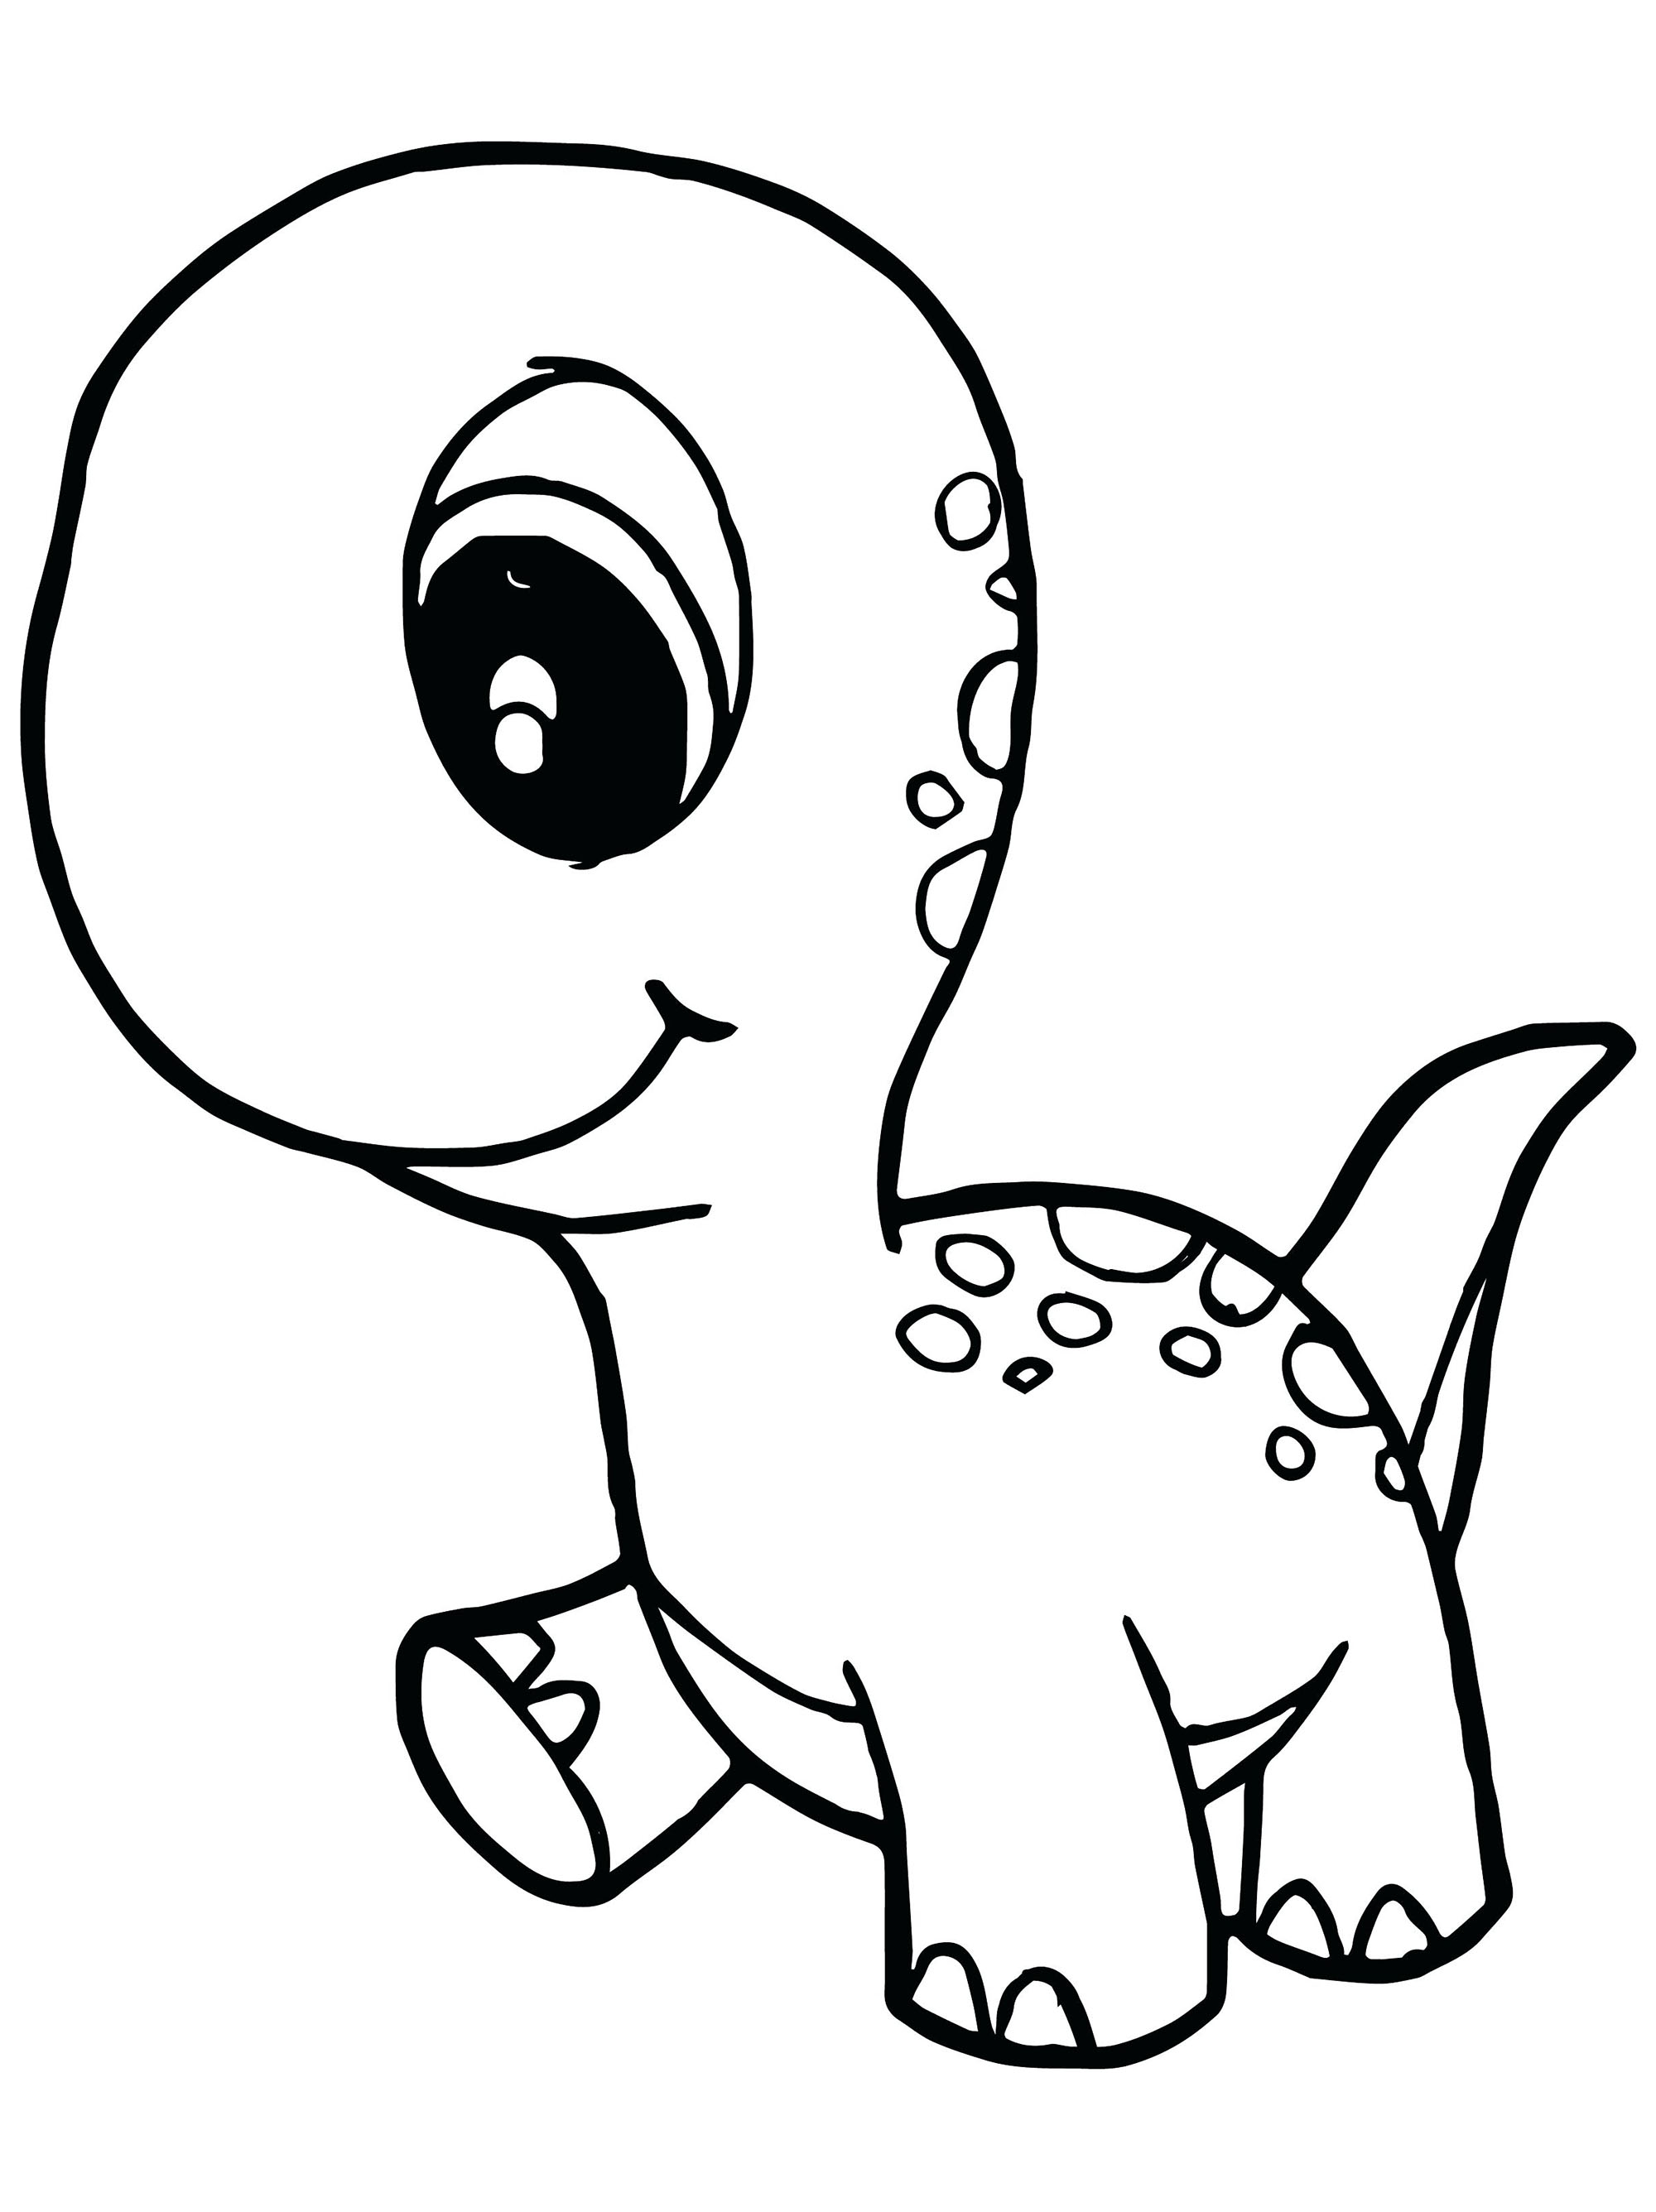 Dinosaurs to download : Ba - Dinosaurs Kids Coloring Pages